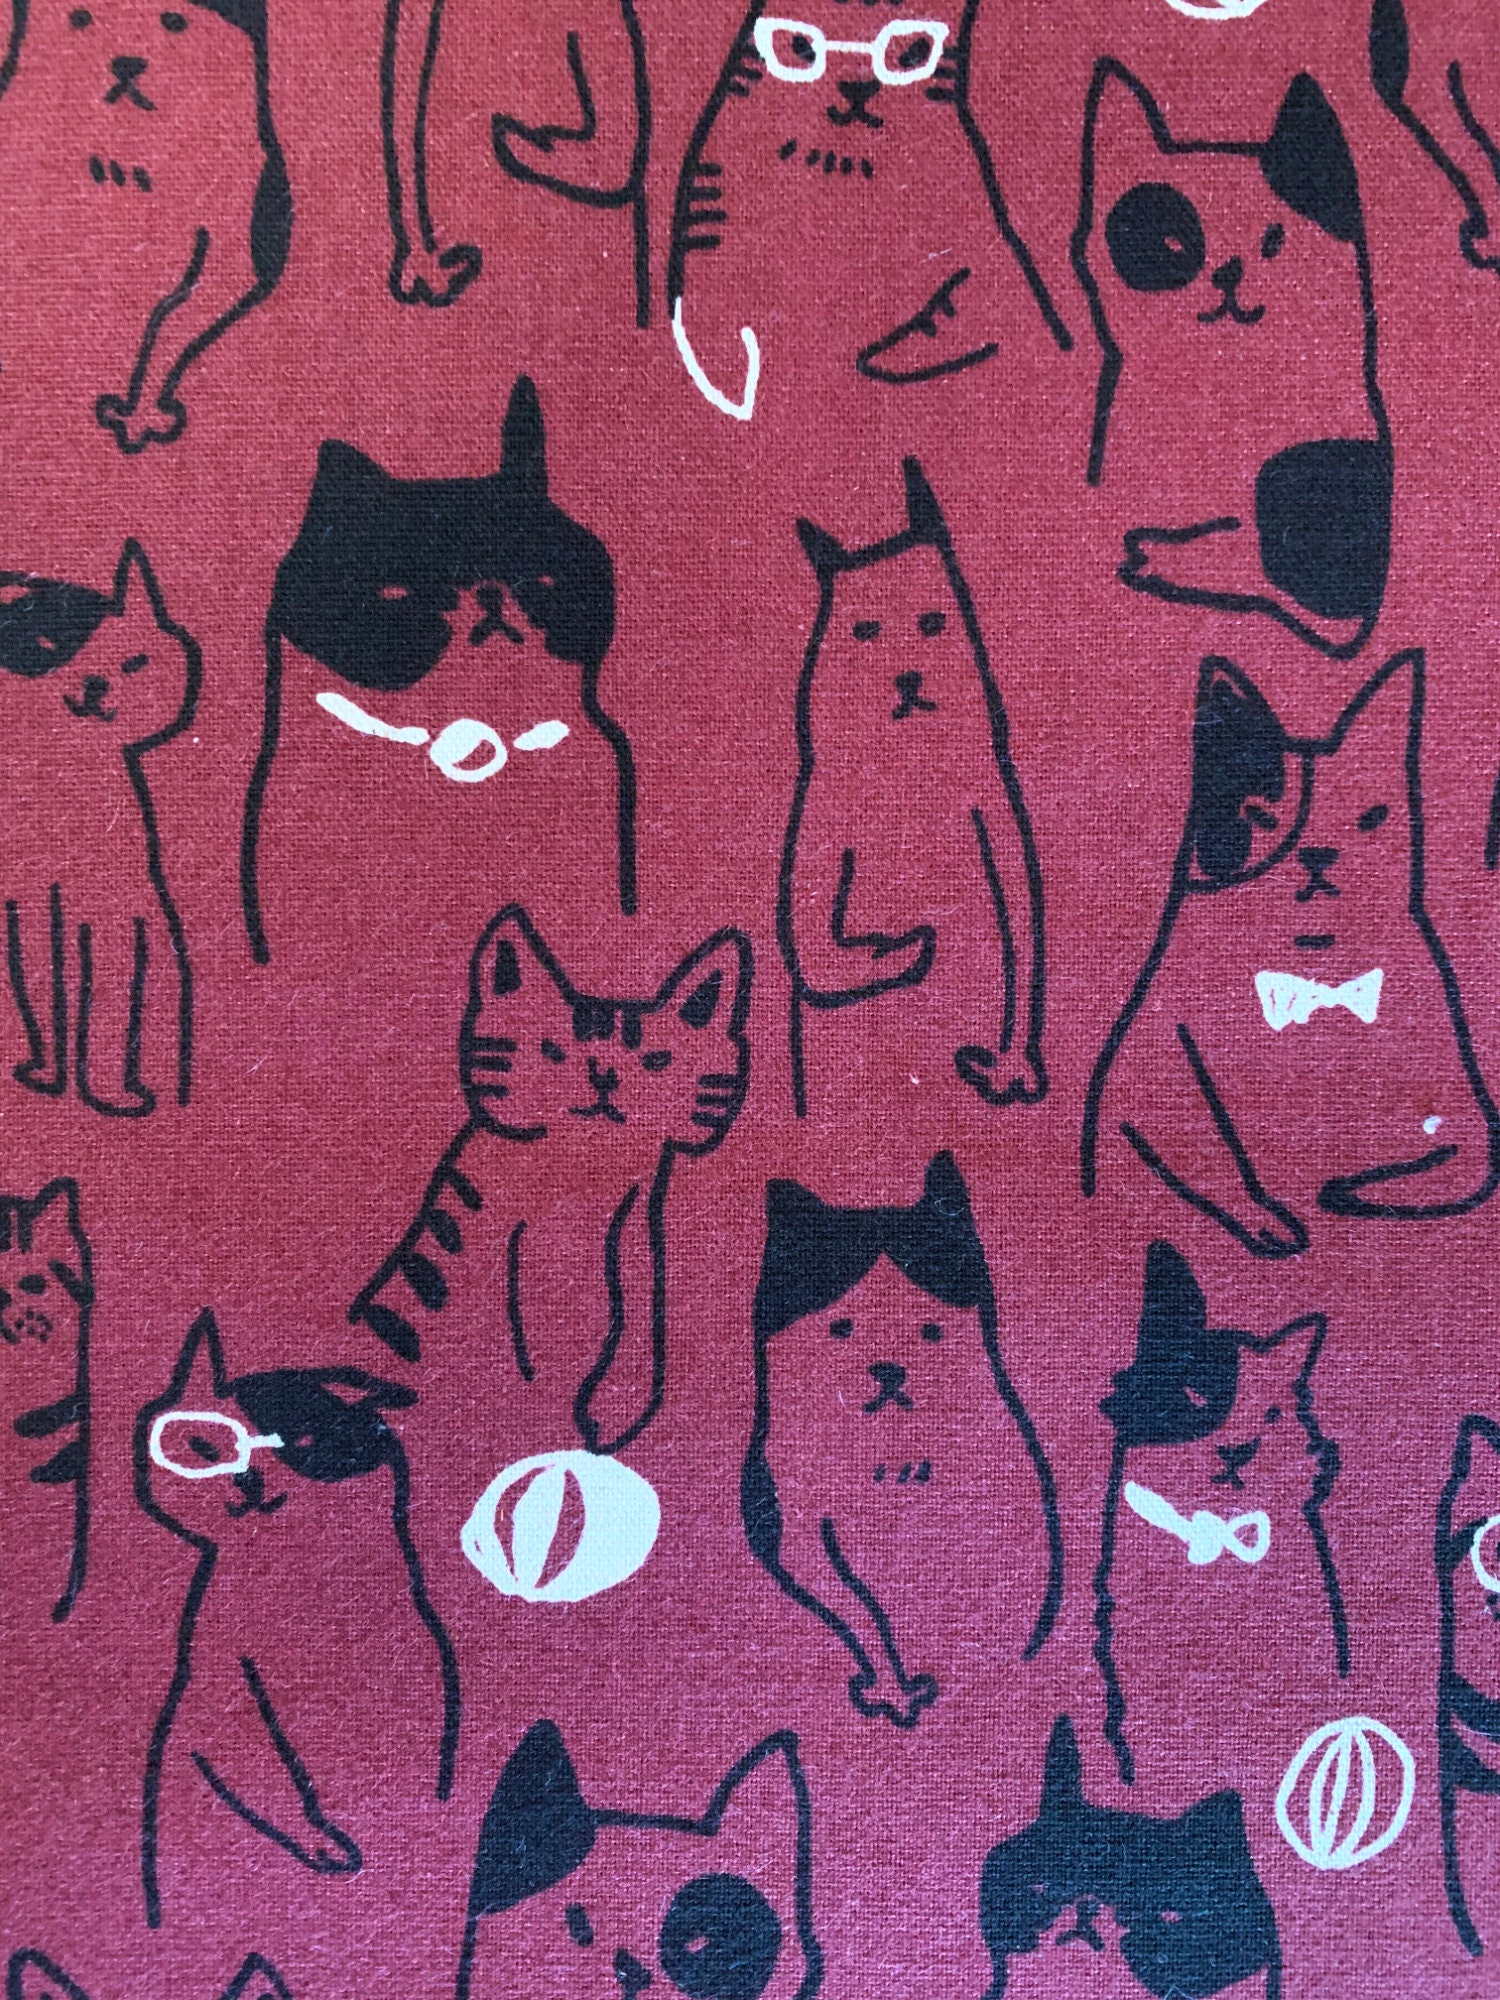 Cool Cats Cosmo Japanese Cotton Linen Fabric AP01712-1D Cranberry Red 